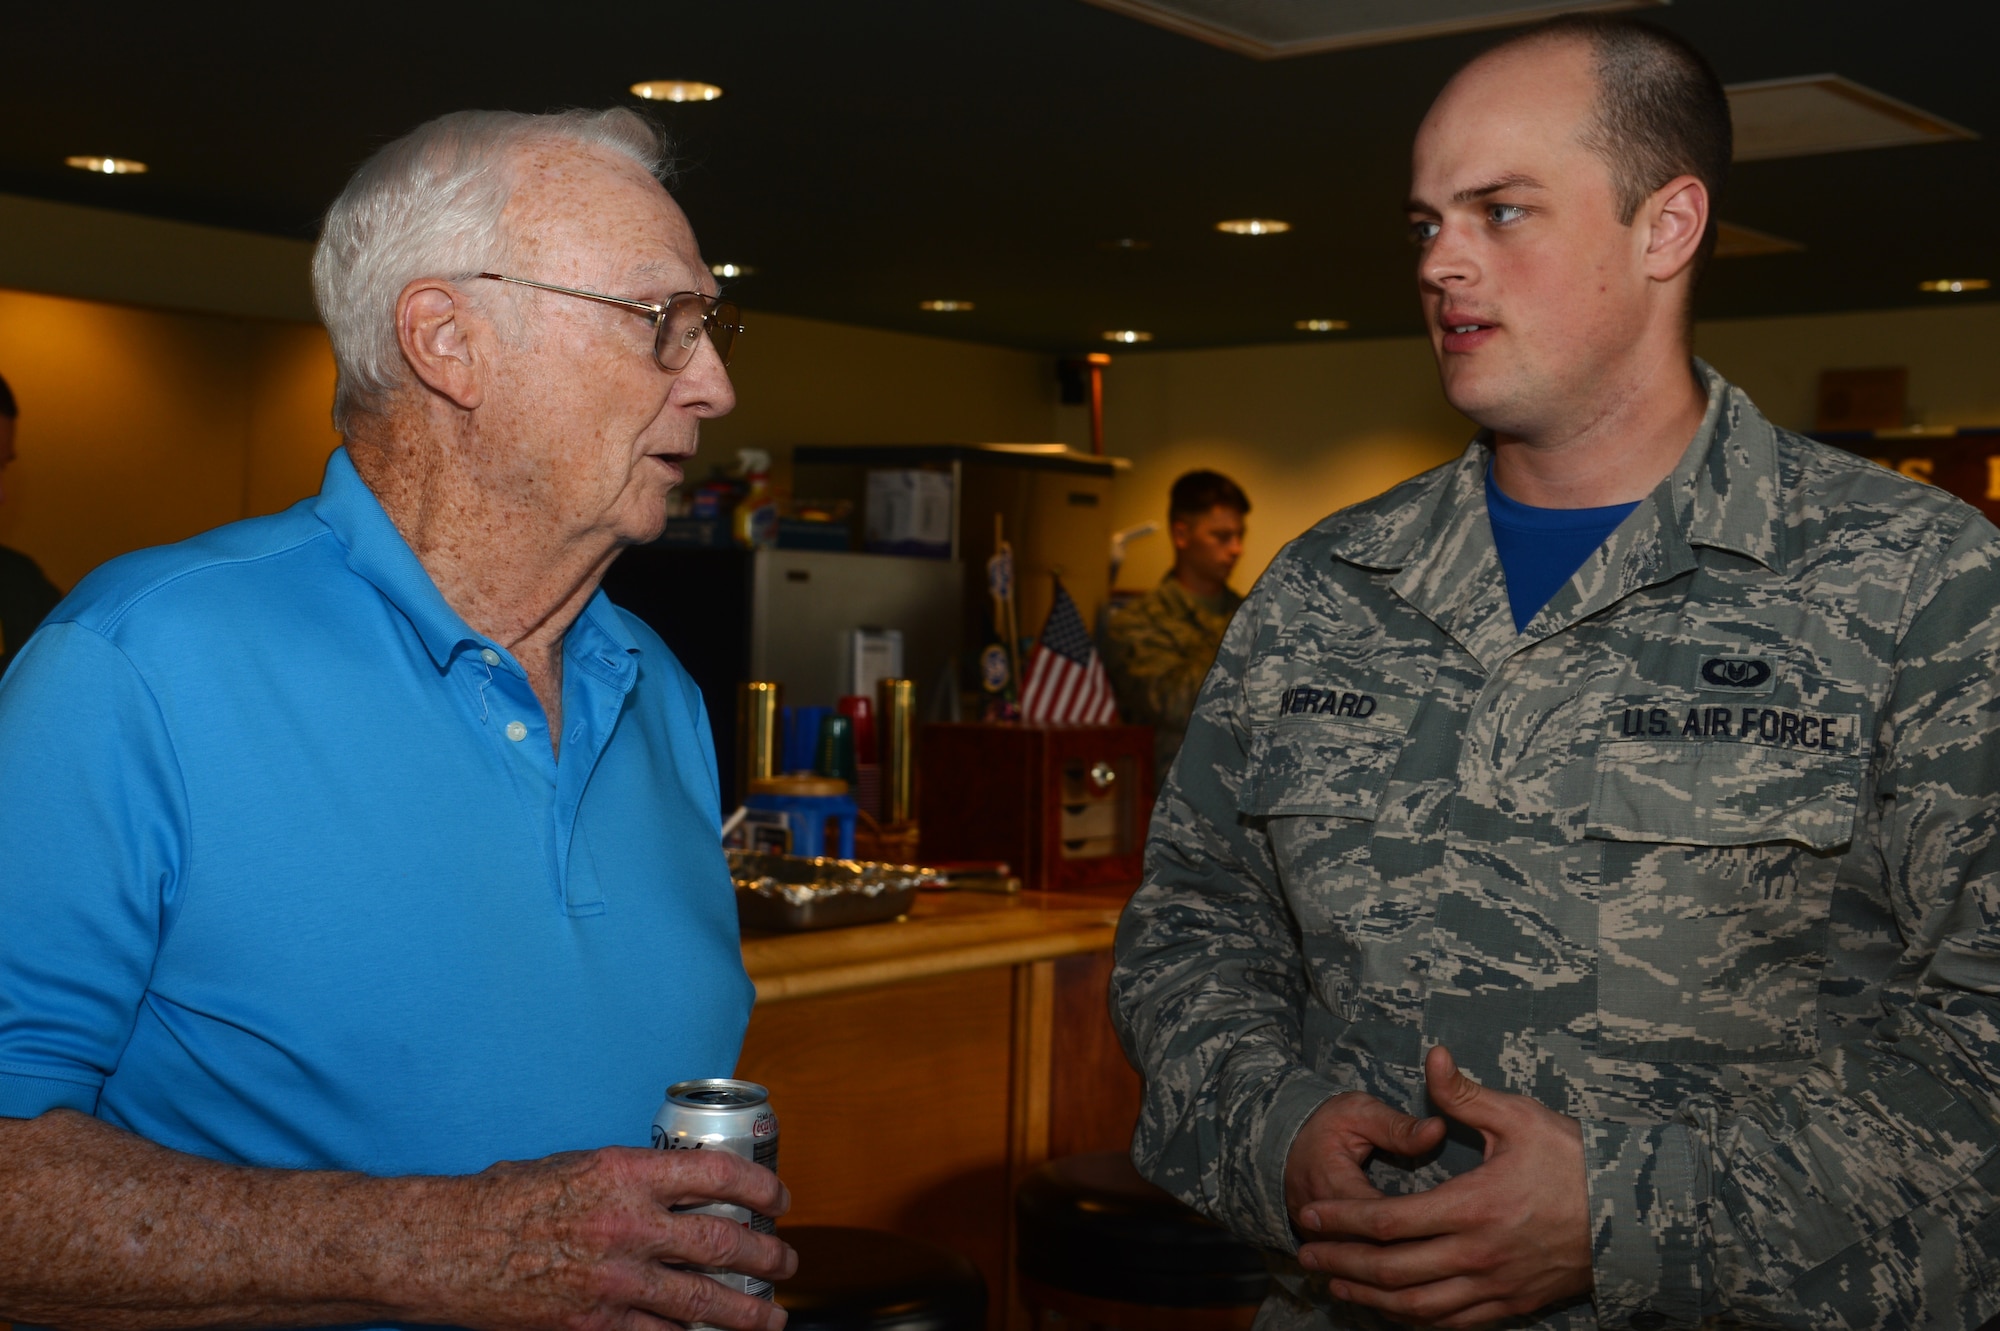 A retired U.S. Air Force Wild Weasel speaks to a current Wild Weasel Airman at Shaw Air Force Base, S.C., June 5, 2015. The Wild Weasels gathered for lunch at the 55th Fighter Squadron during their 50th anniversary celebration. (U.S. Air Force photo by Senior Airman Jonathan Bass/Released)